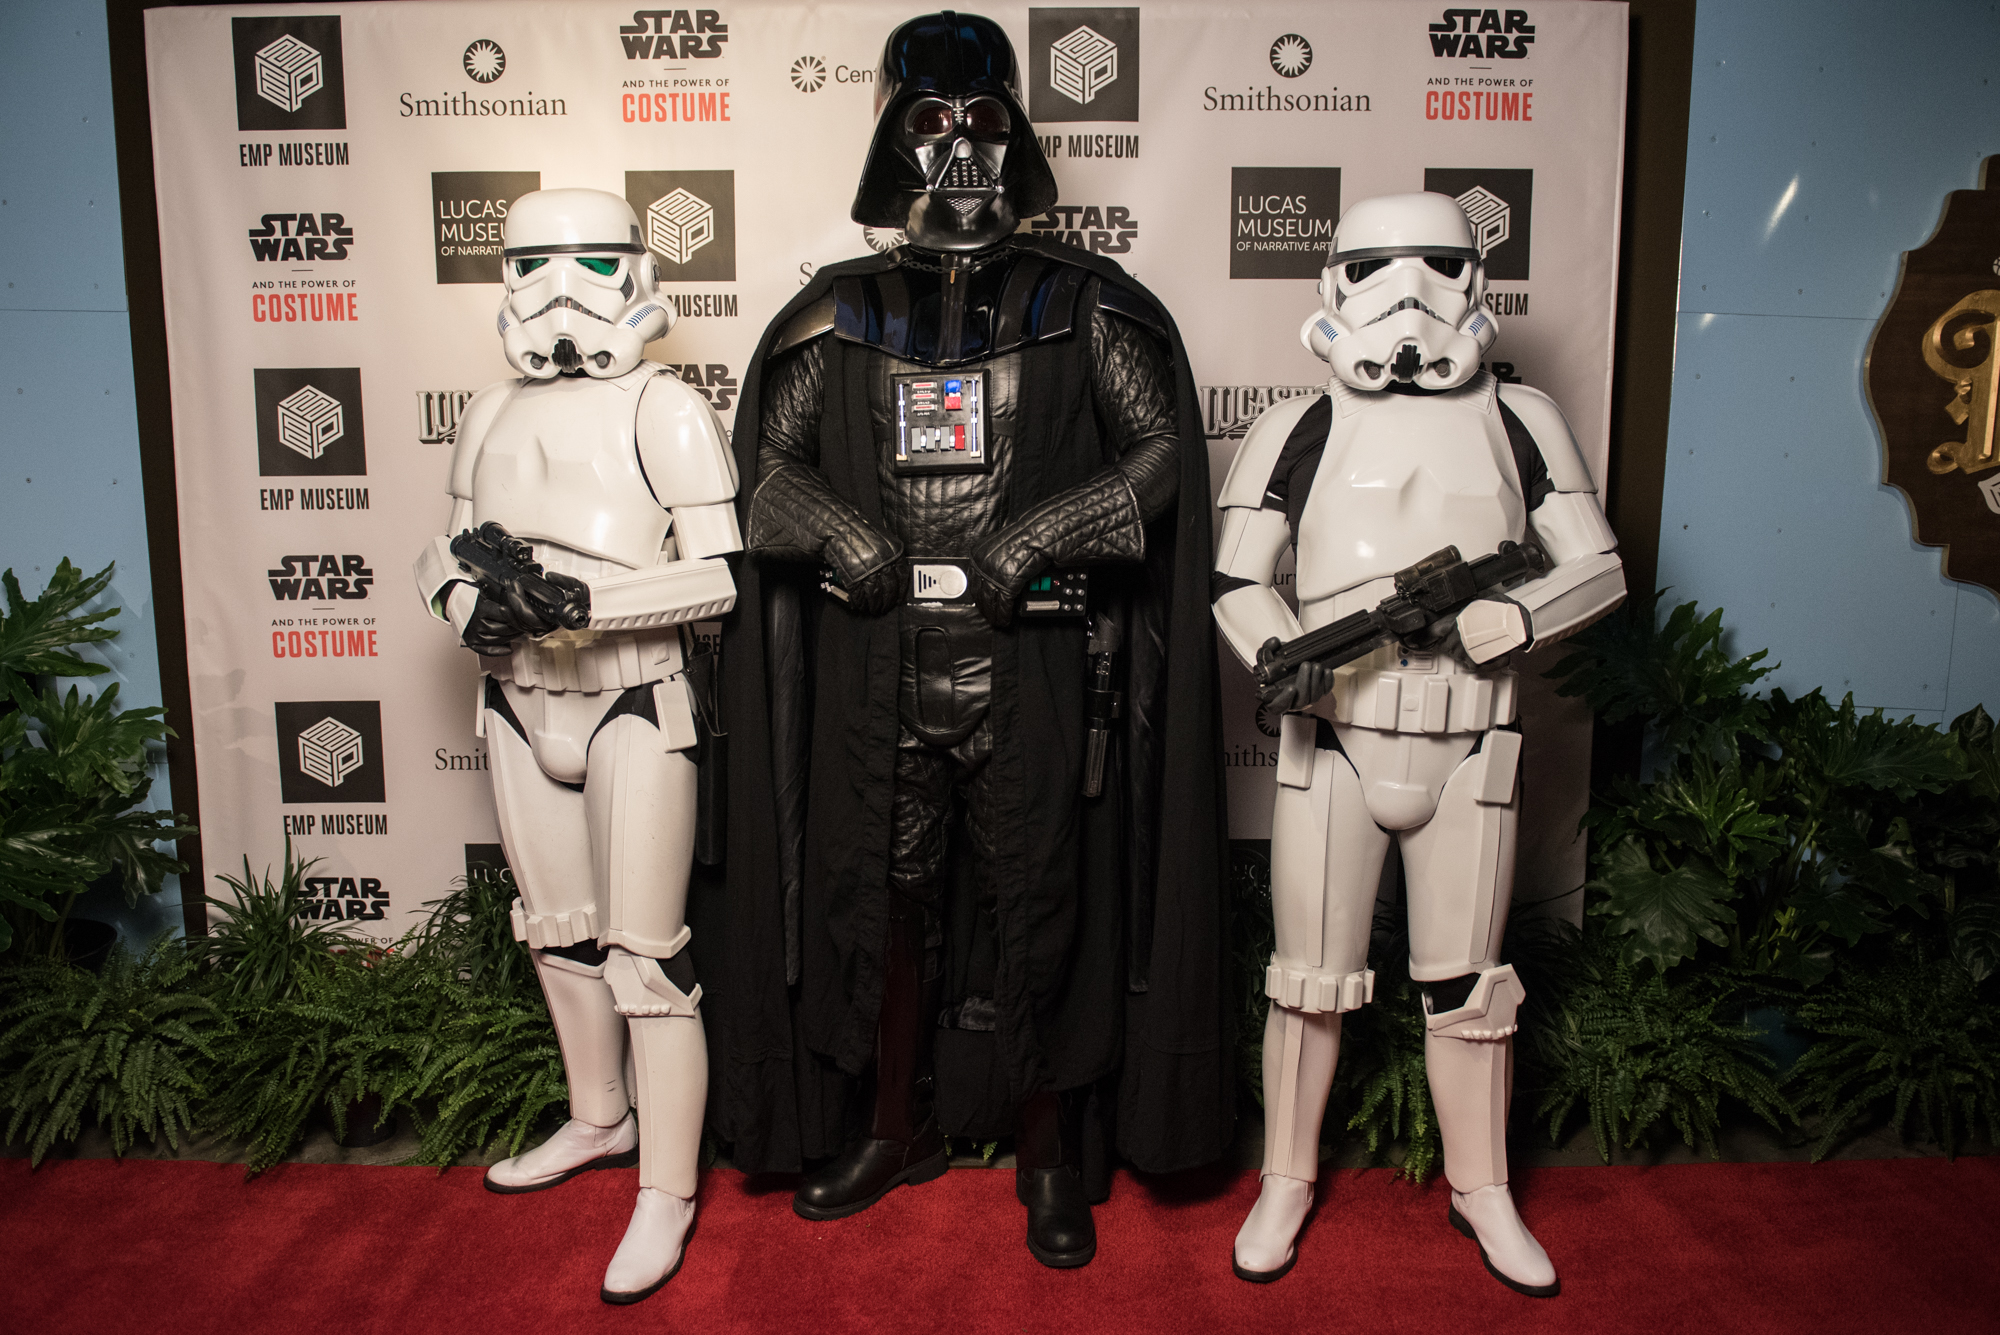 What's a Star Wars opening without Darth Vader and his storm troopers.